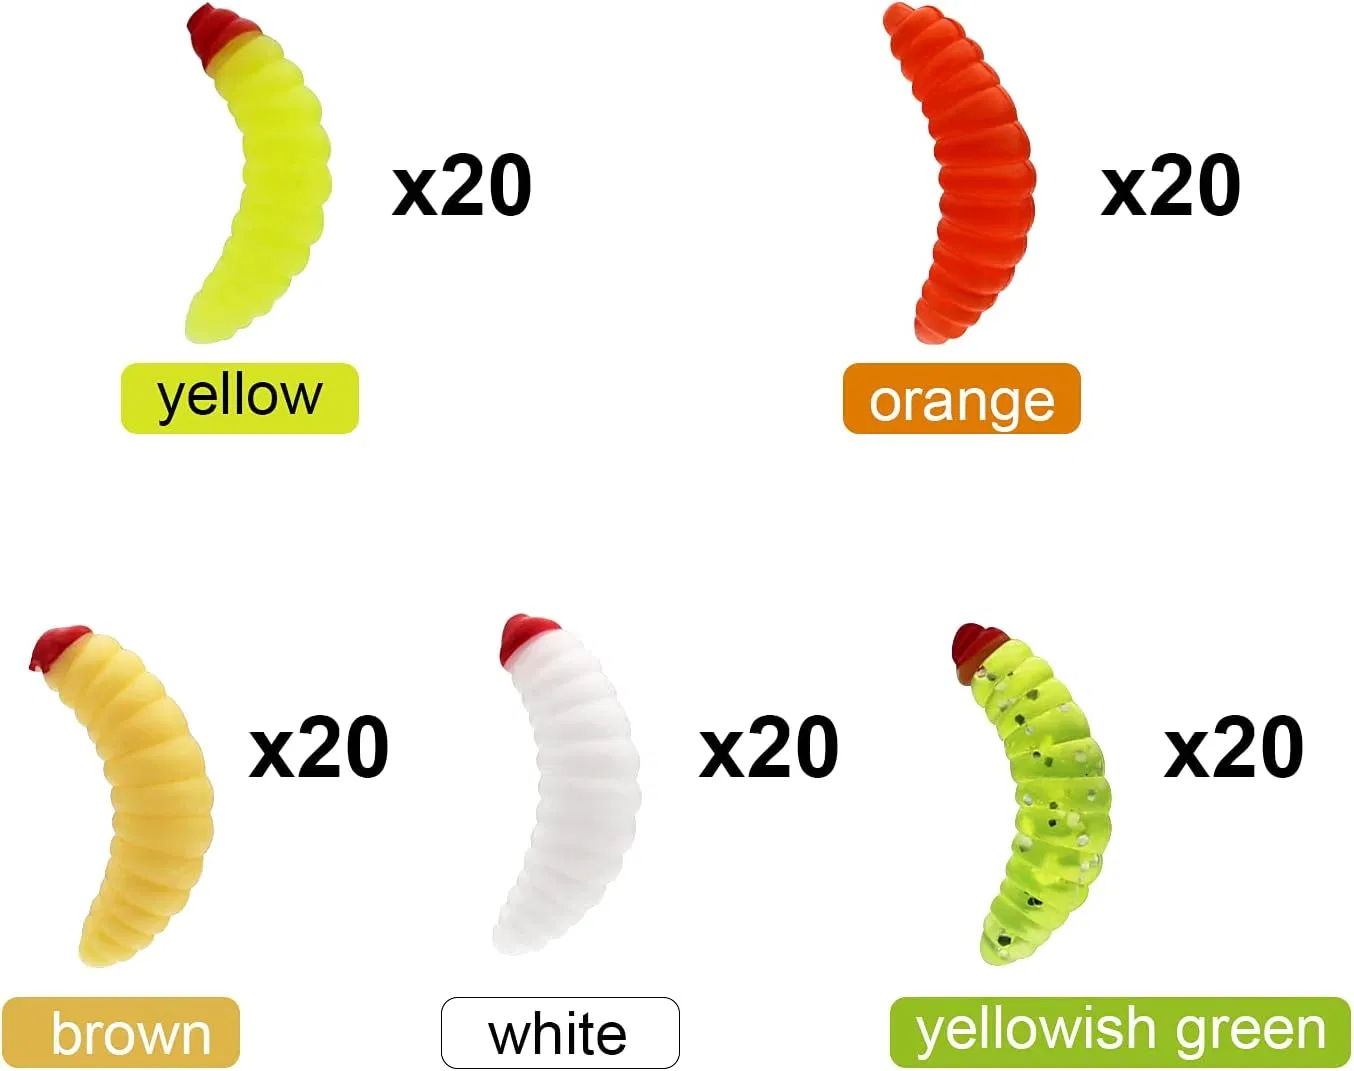 Proper Size to Use: Our Plastic Worms for Bass Fishing Come in a Size of About 0.79 Inch/ 2 Cm, and Can Be Stretched to a Size of About 0.94 Inch/ 2.4 Cm,